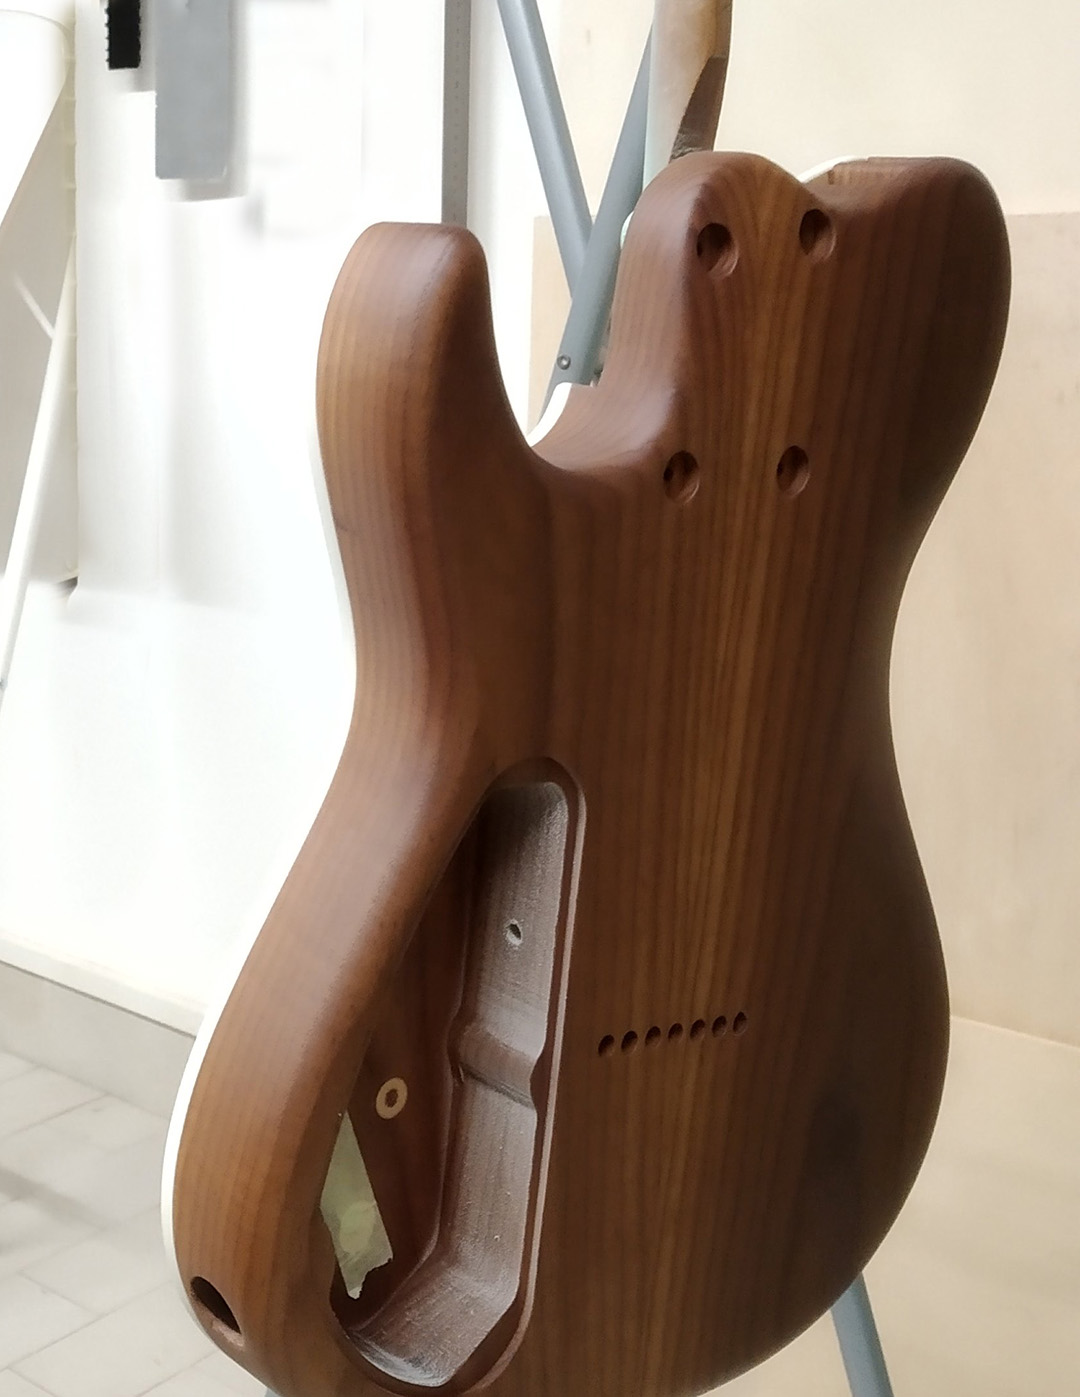 Build your own guitar online the body drying